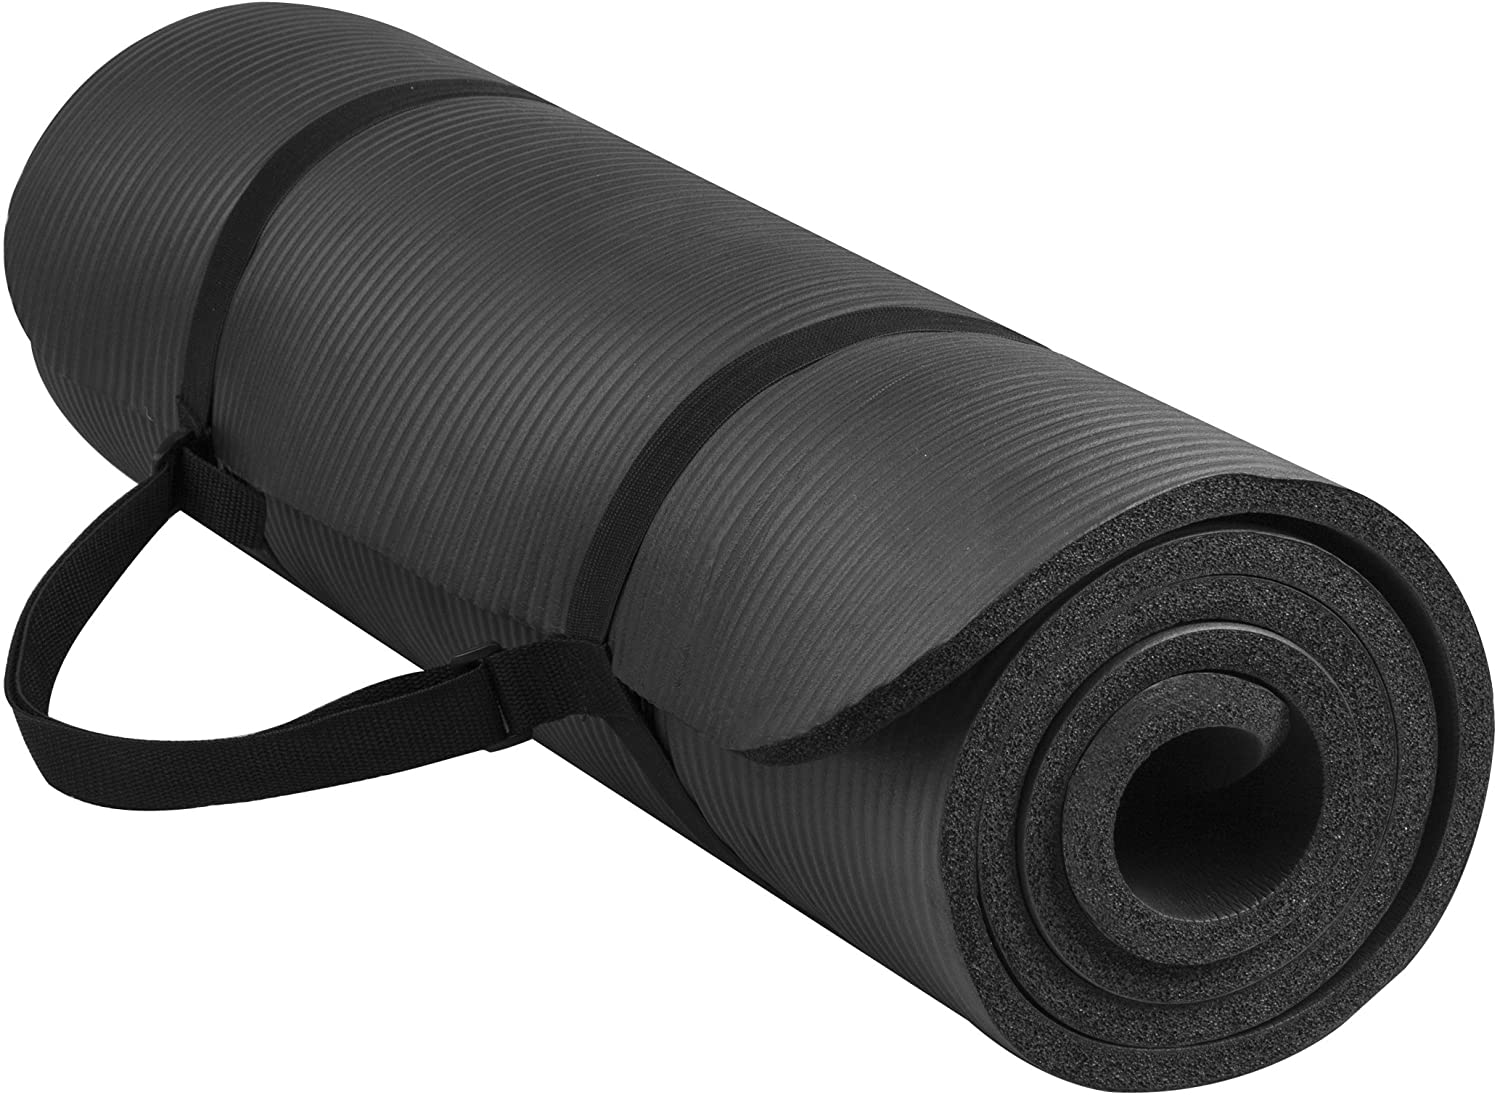  BalanceFrom GoYoga All-Purpose 1/2-Inch Extra Thick High Density